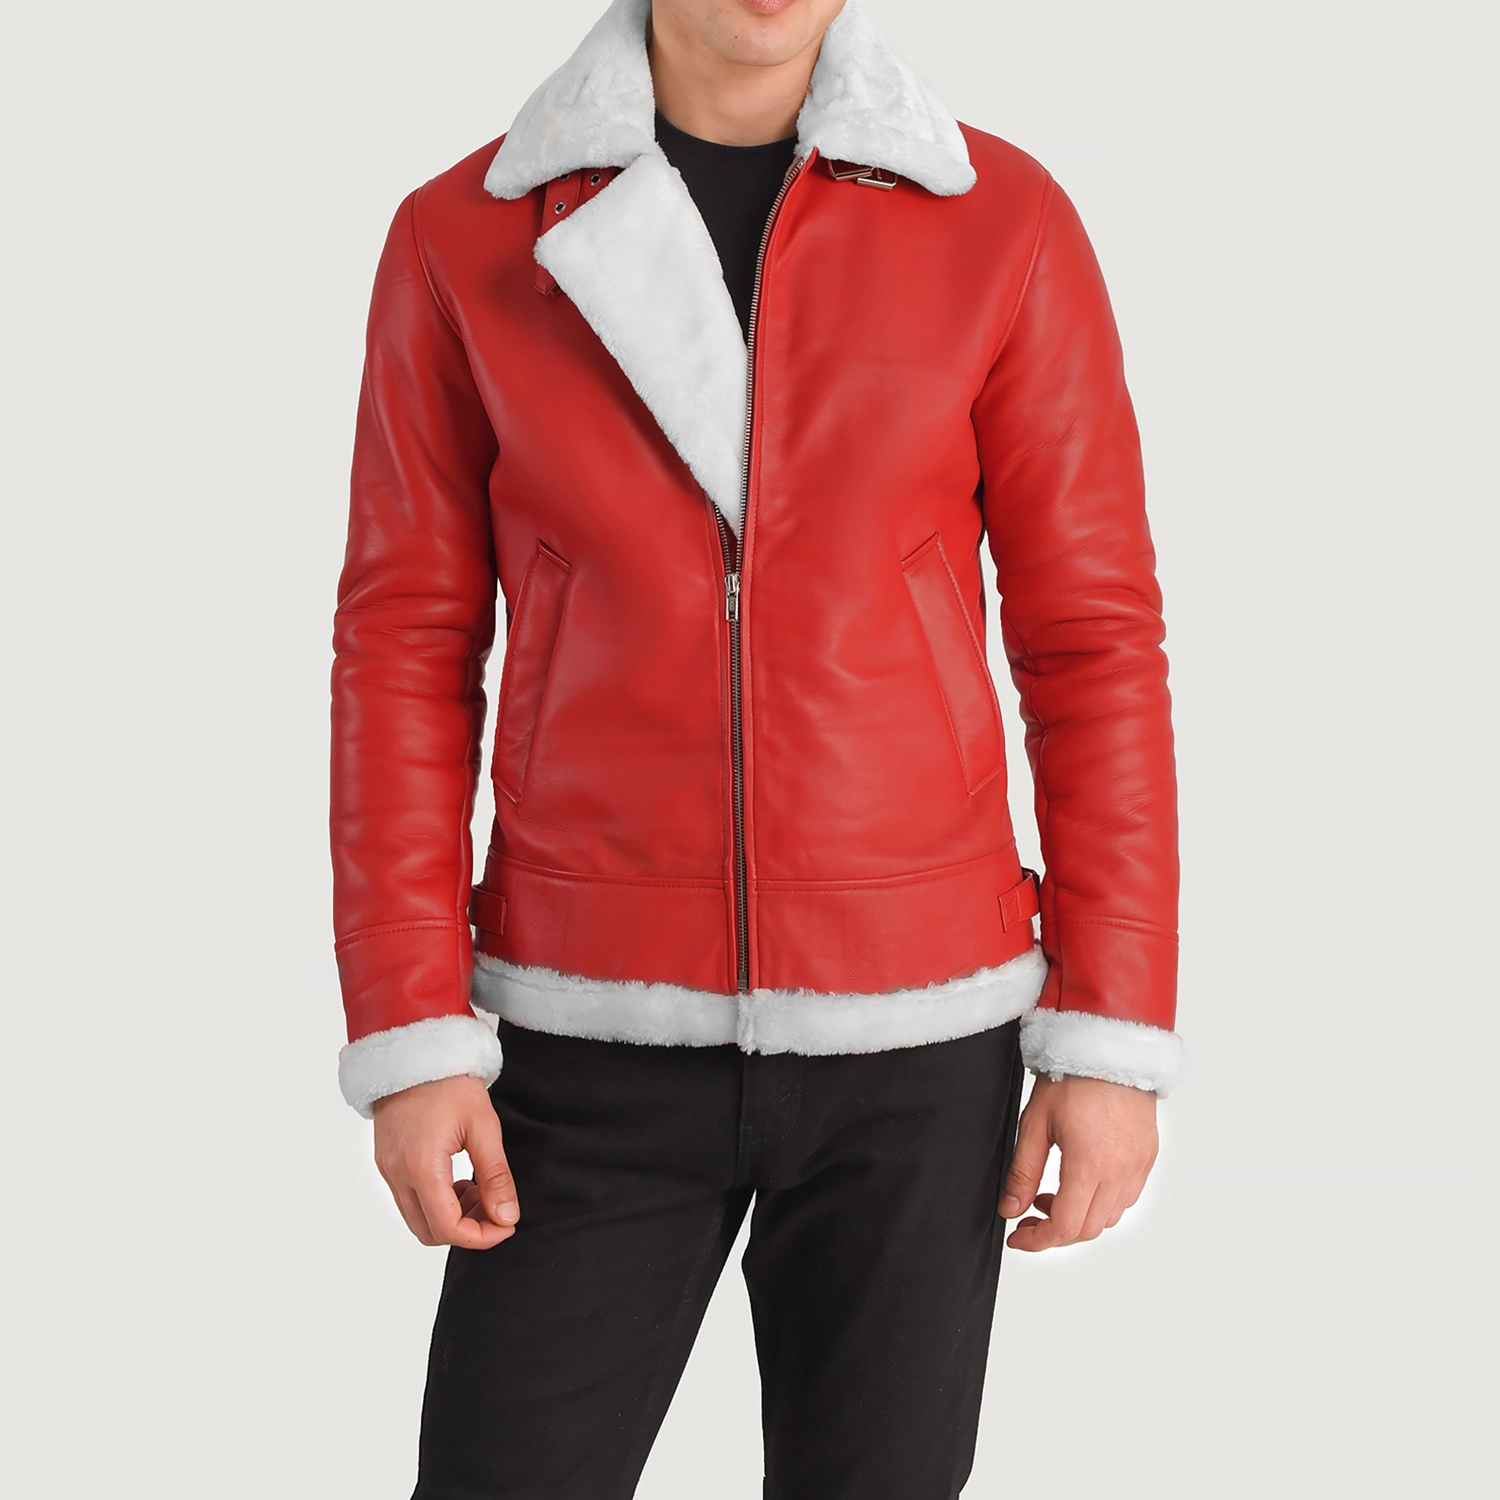 Francis B-3 Red Leather Bomber Jacket